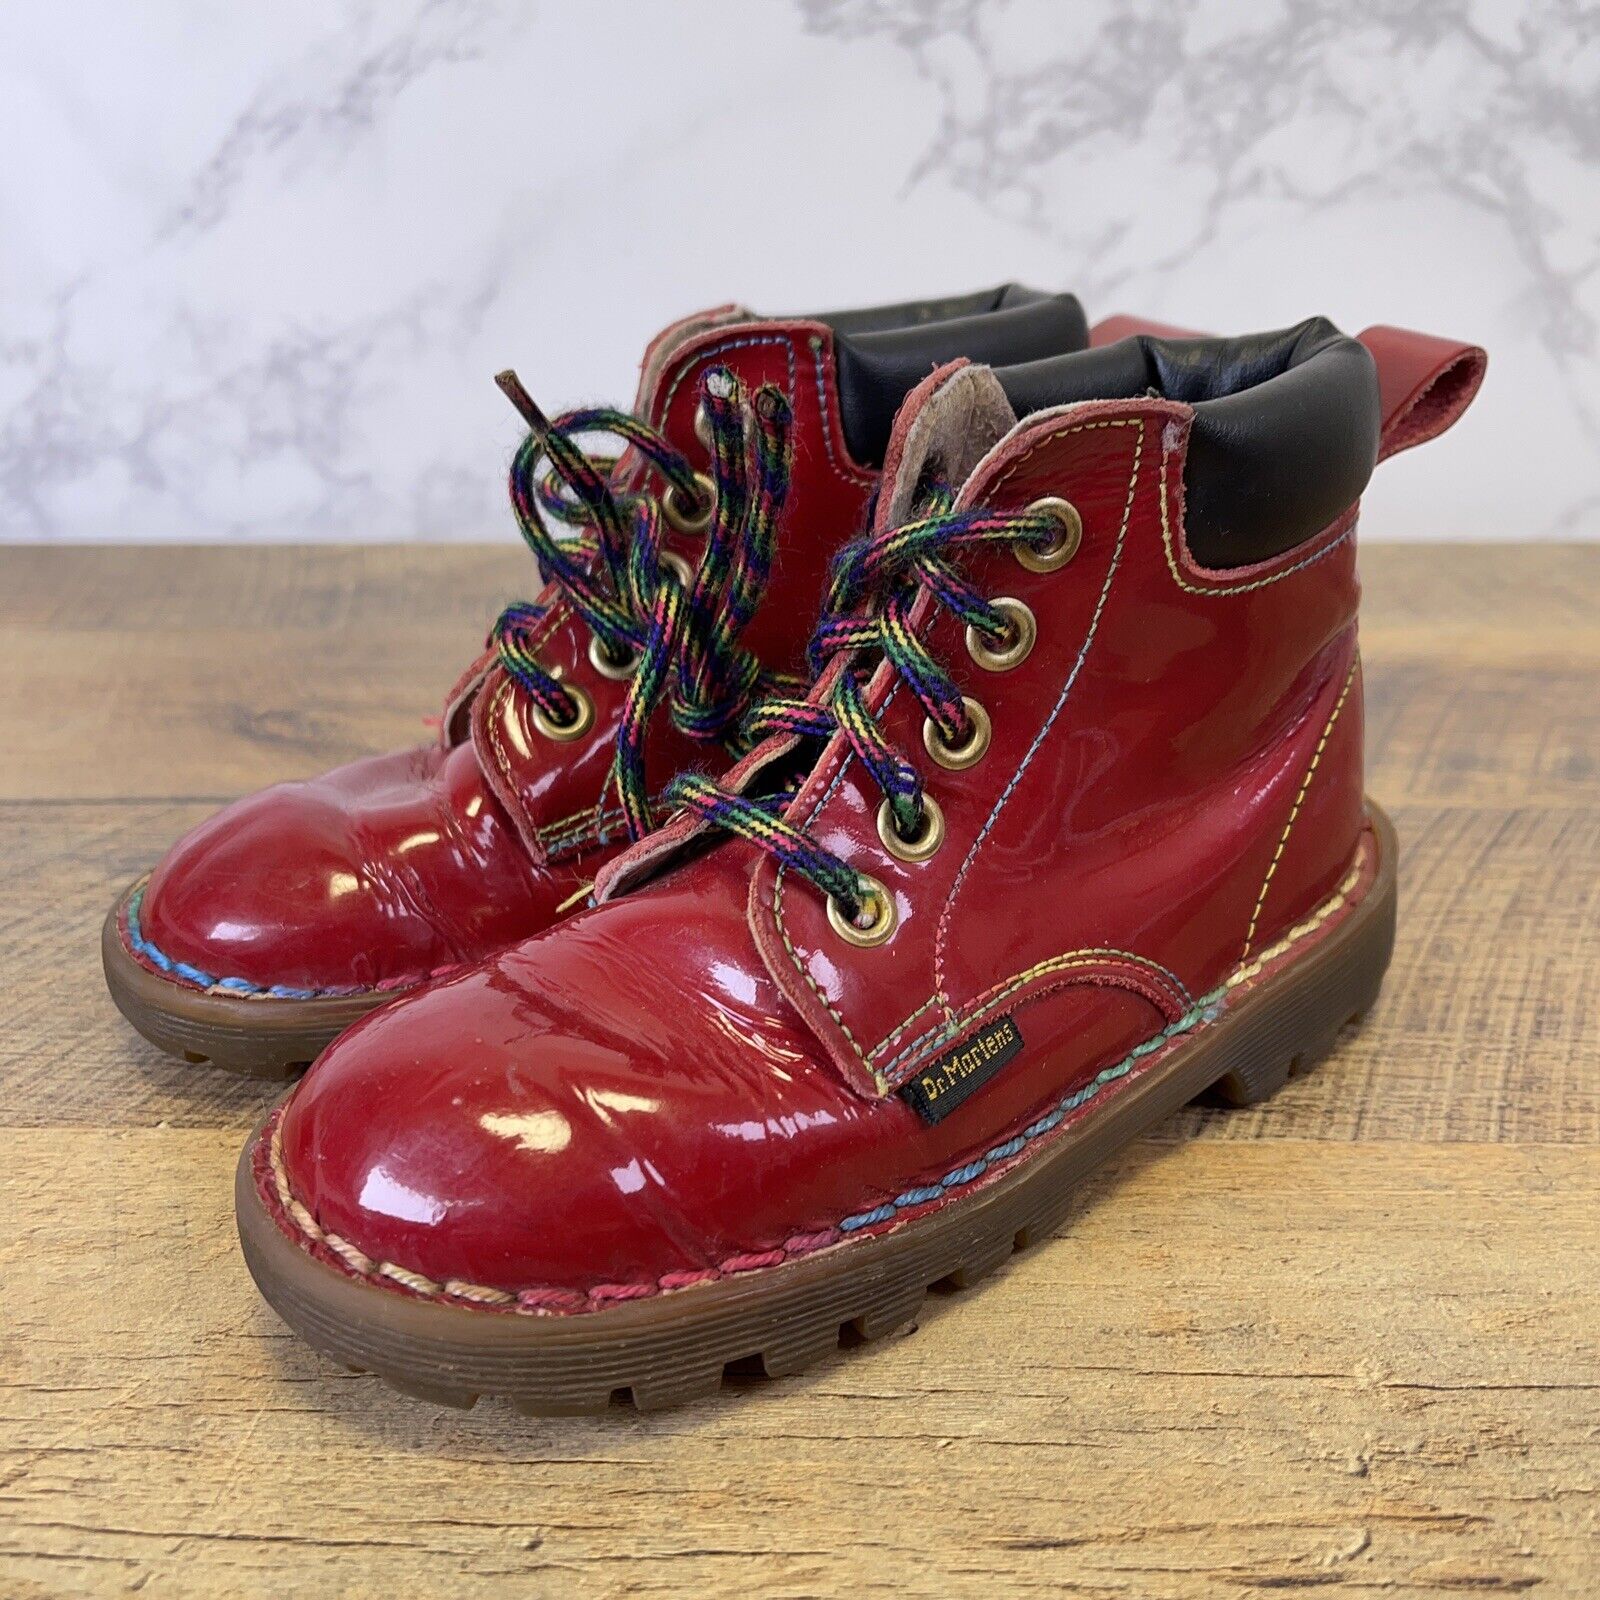 Dr. Martens Boots Toddler Girls 11.5 Red Patent Leather Air Wair England Vintage